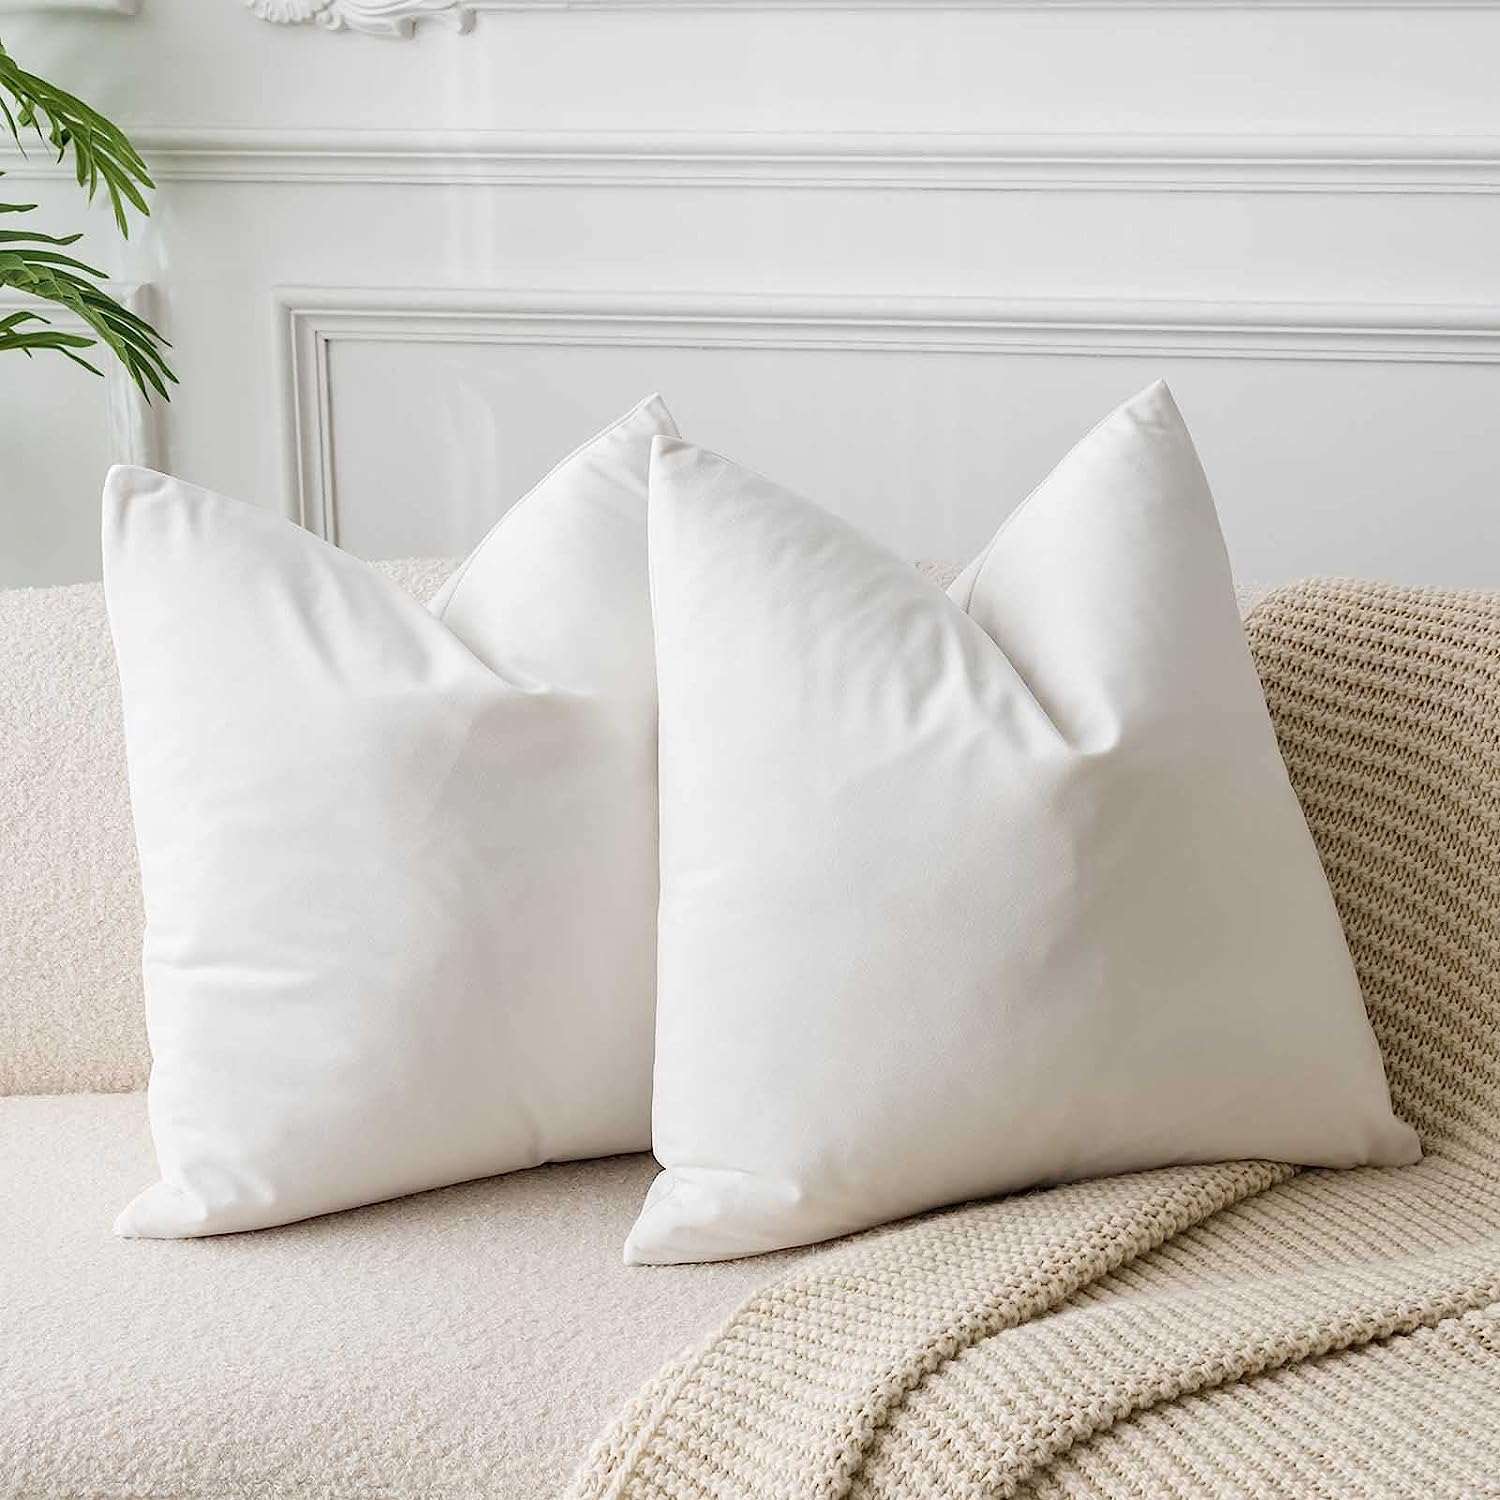  JUSPURBET Cream White Velvet Throw Pillow Covers 22x22 Set of 2,Decorative Soft Solid Cushion Cases for Couch Sofa Bed 